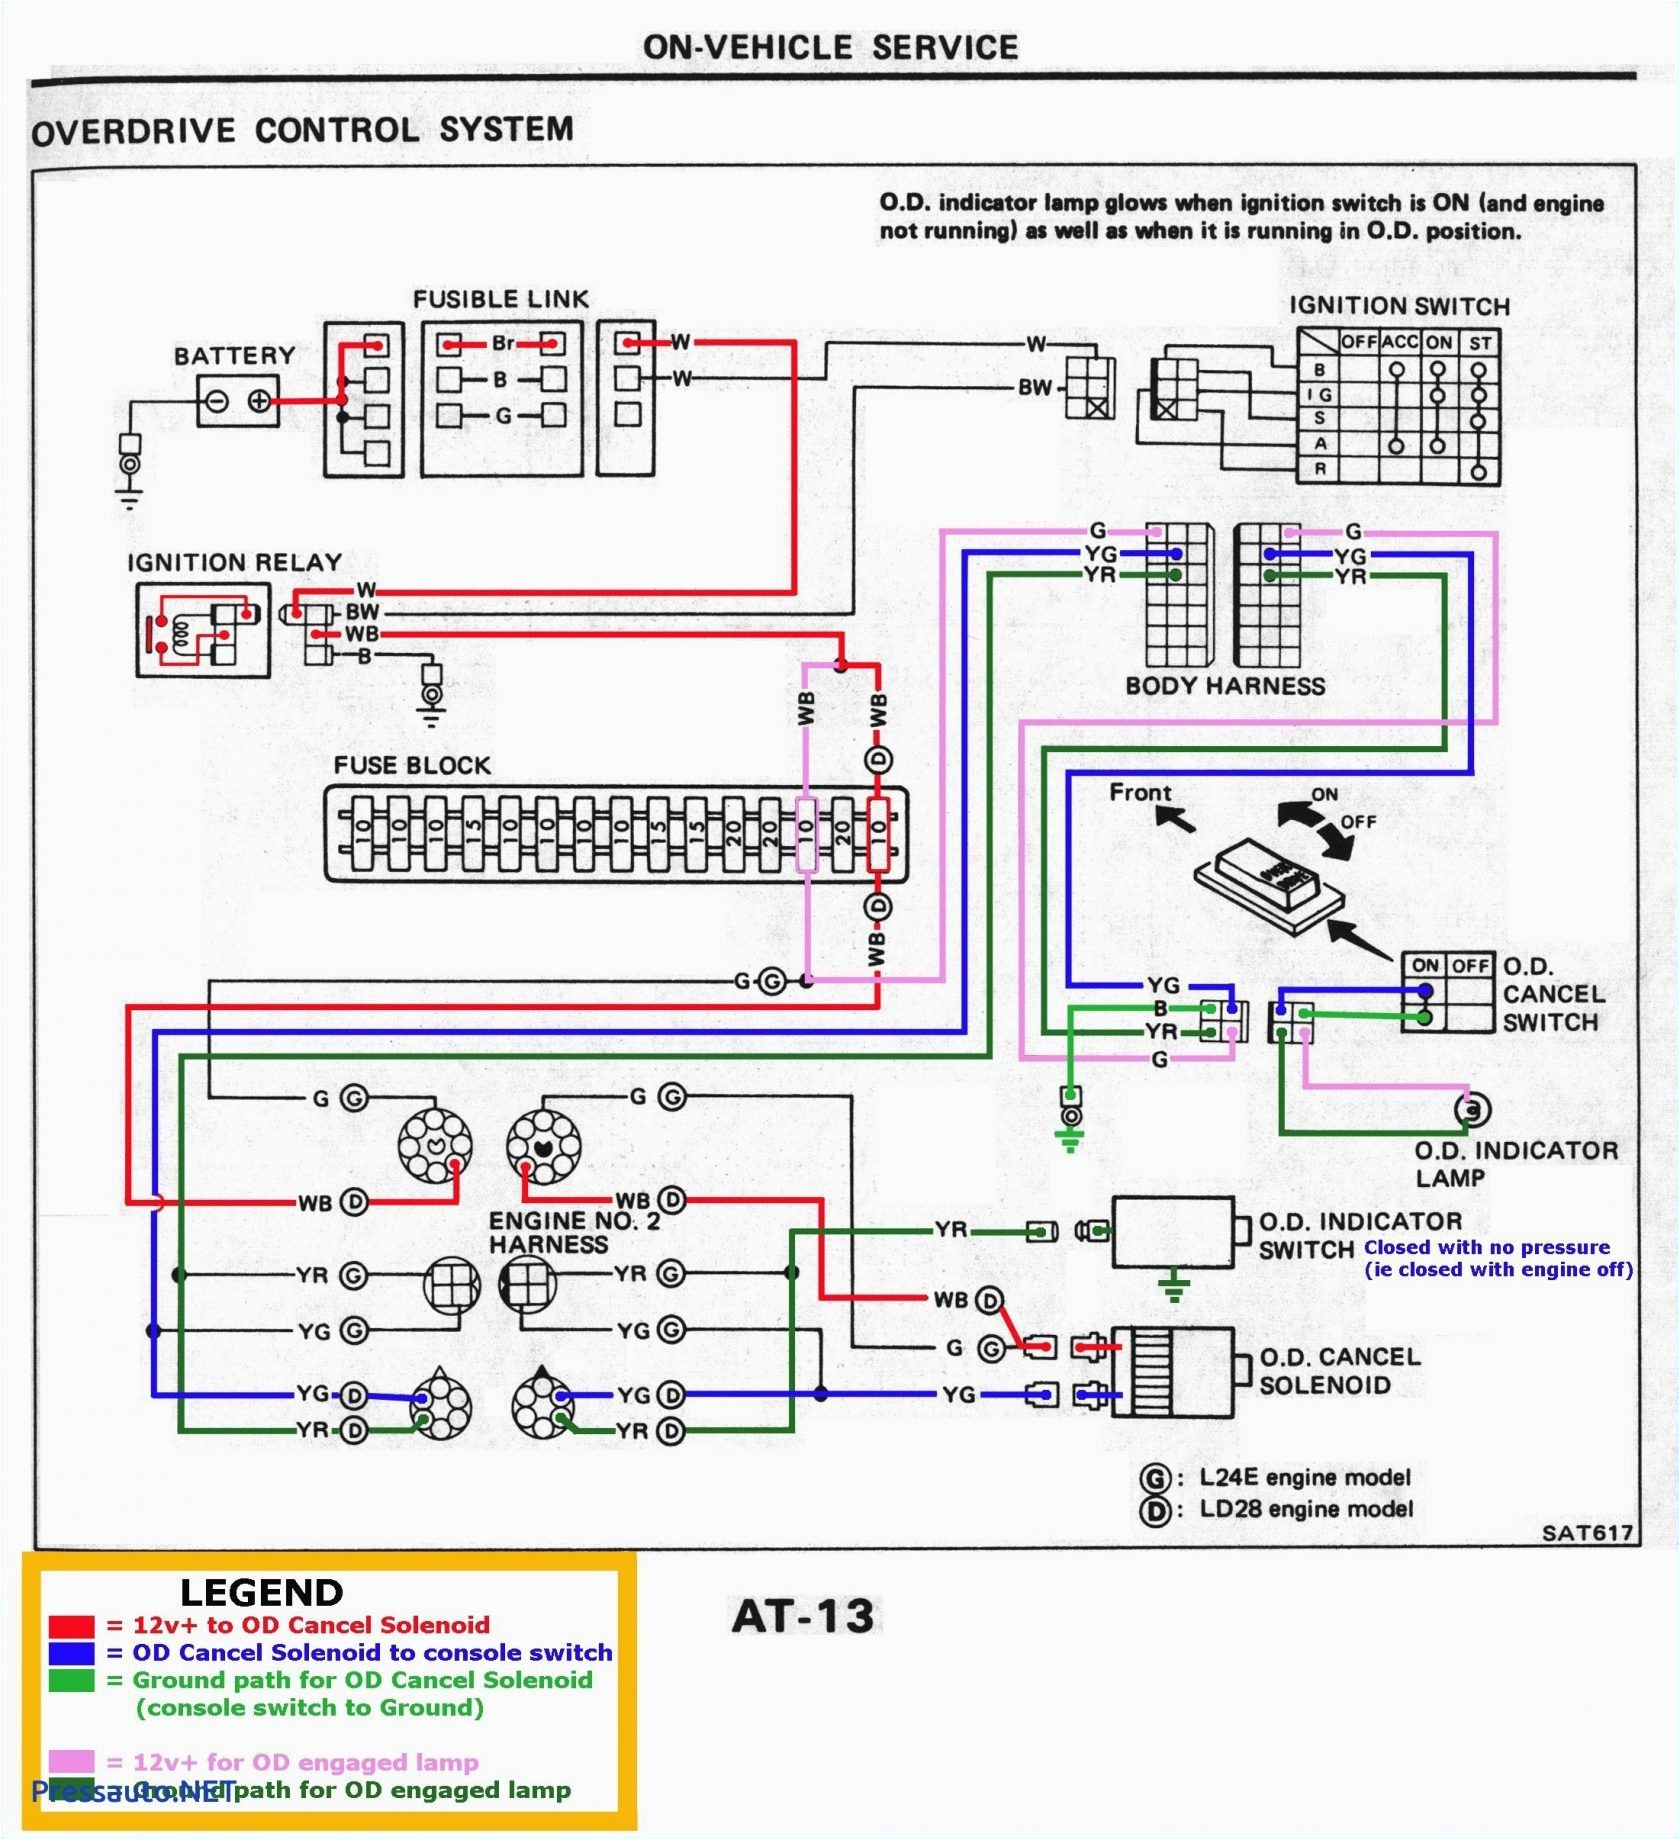 wiring diagram for a 2007 toyota tacoma get free image about wiring start stop switch wiring diagram free picture